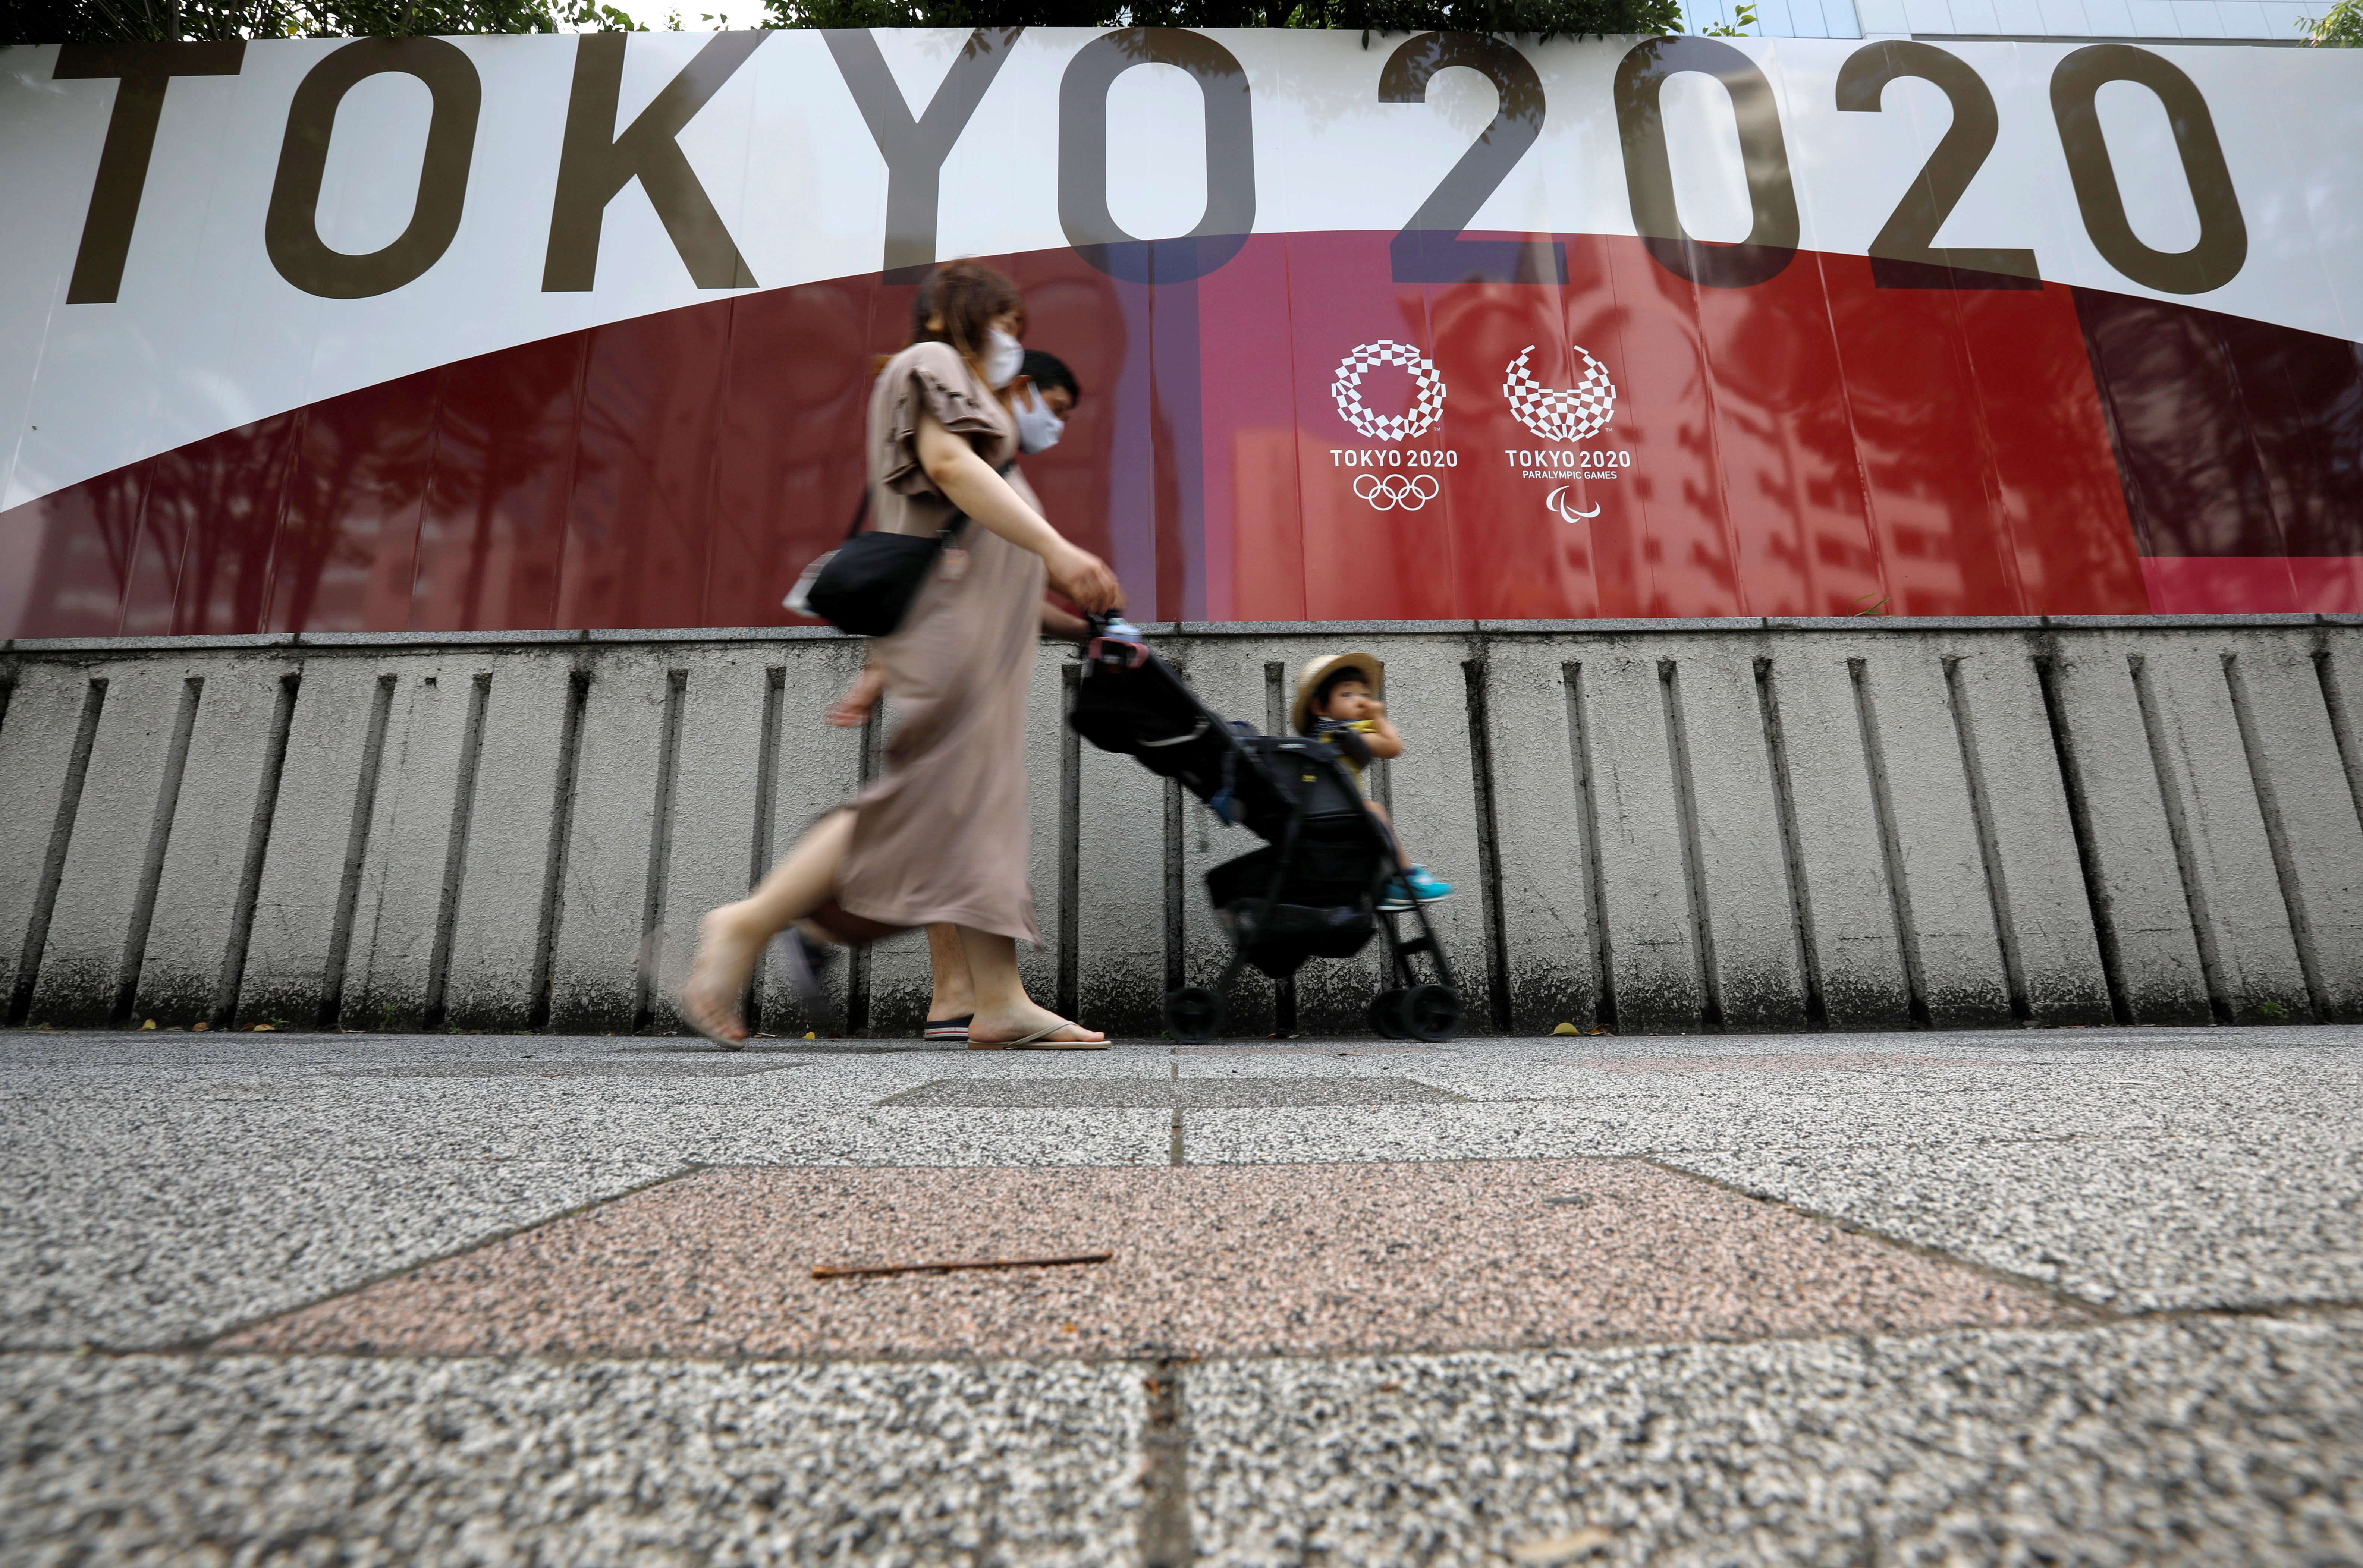 A family walks past an advertisement for Tokyo 2020 Olympic and Paralympic Games